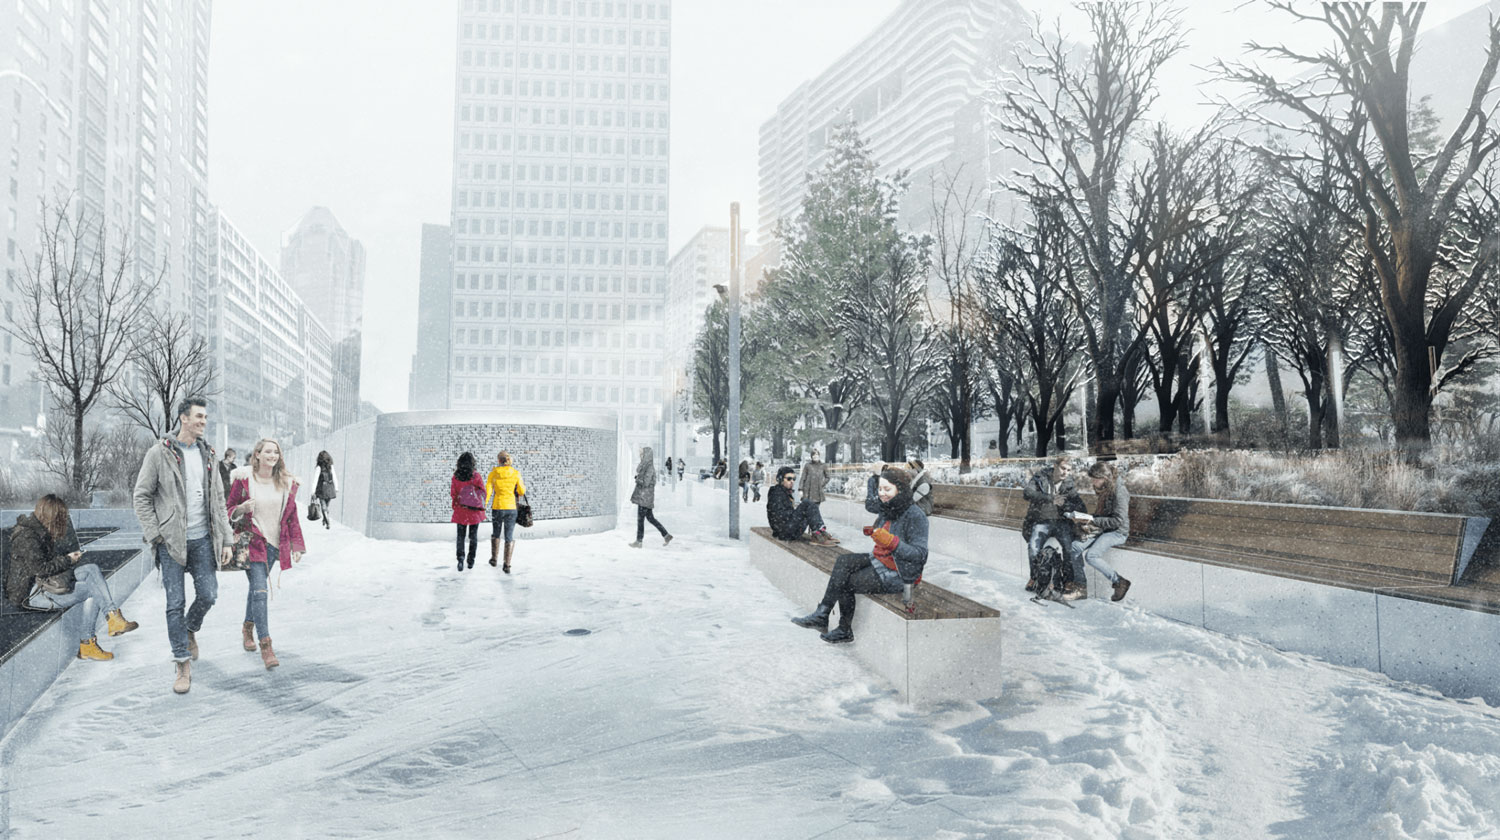 E_Lemay_Montreal_PlaceMaking_Terrain066_Landscapearchitecture_Architecture_Landscape_View_MontrealDowntown_Winter